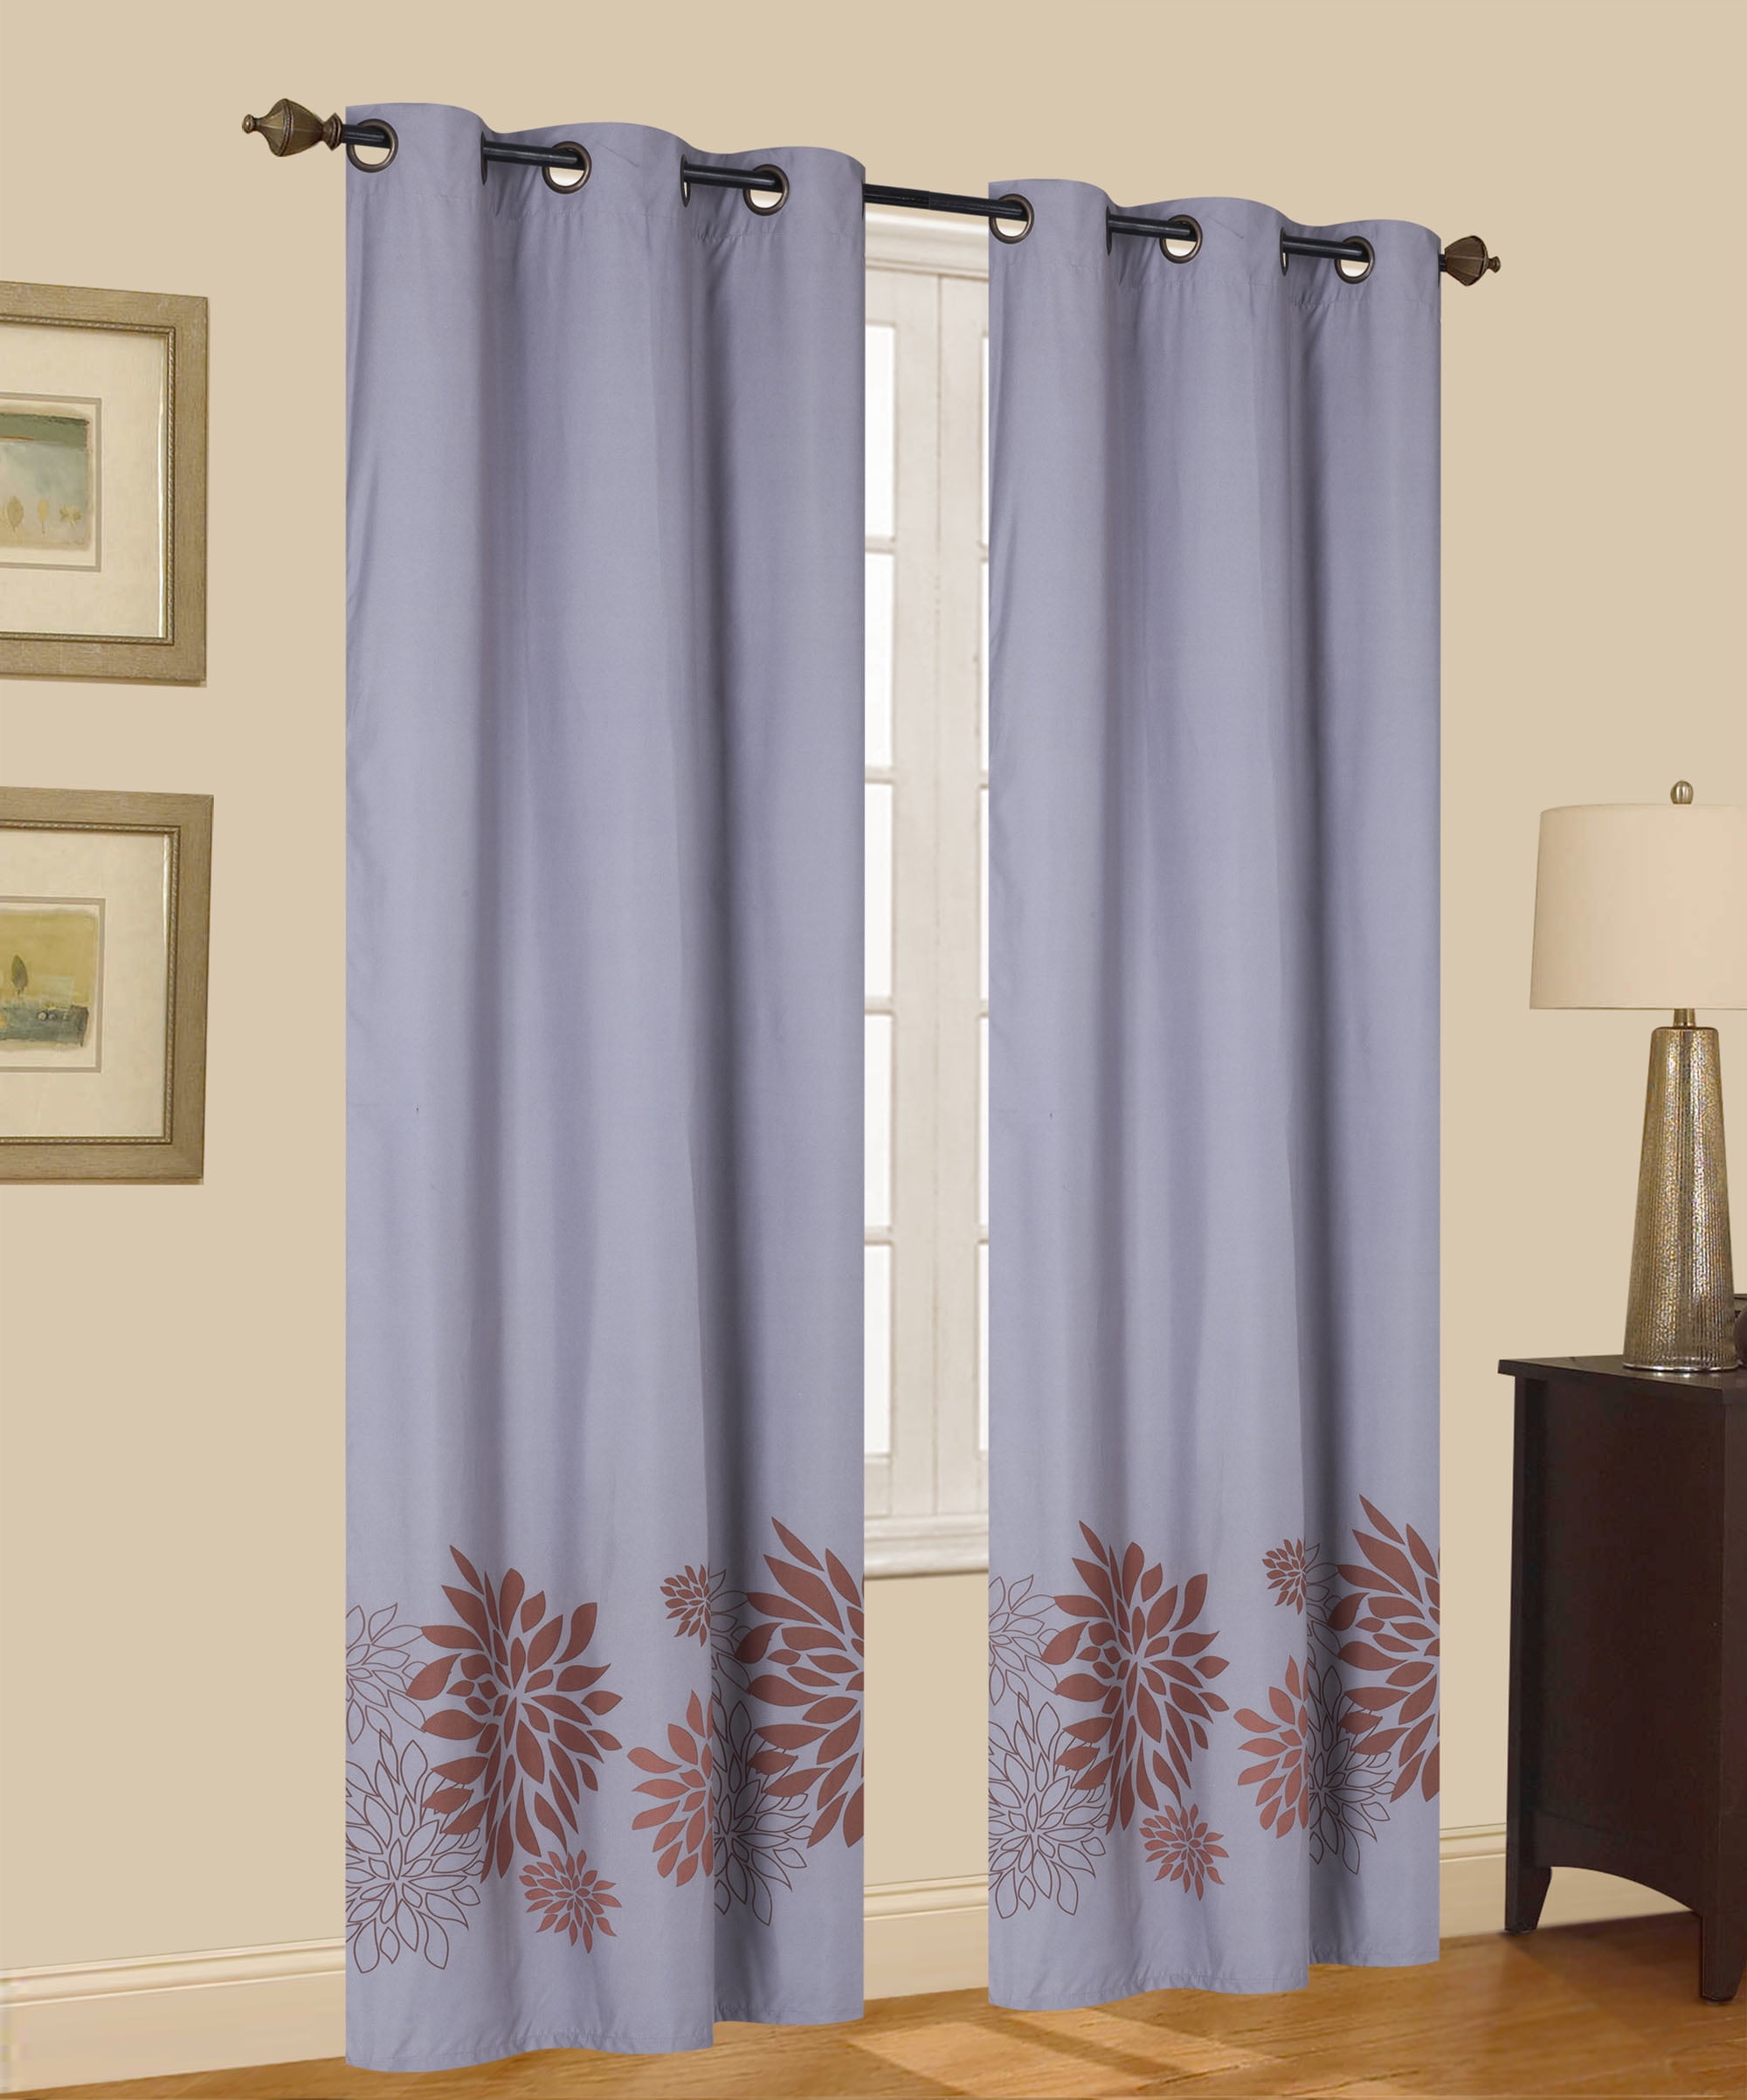 NEW 2 PRINTED SILVER GROMMET PANELS LINED BLACKOUT WINDOW CURTAIN EVA TEAL 